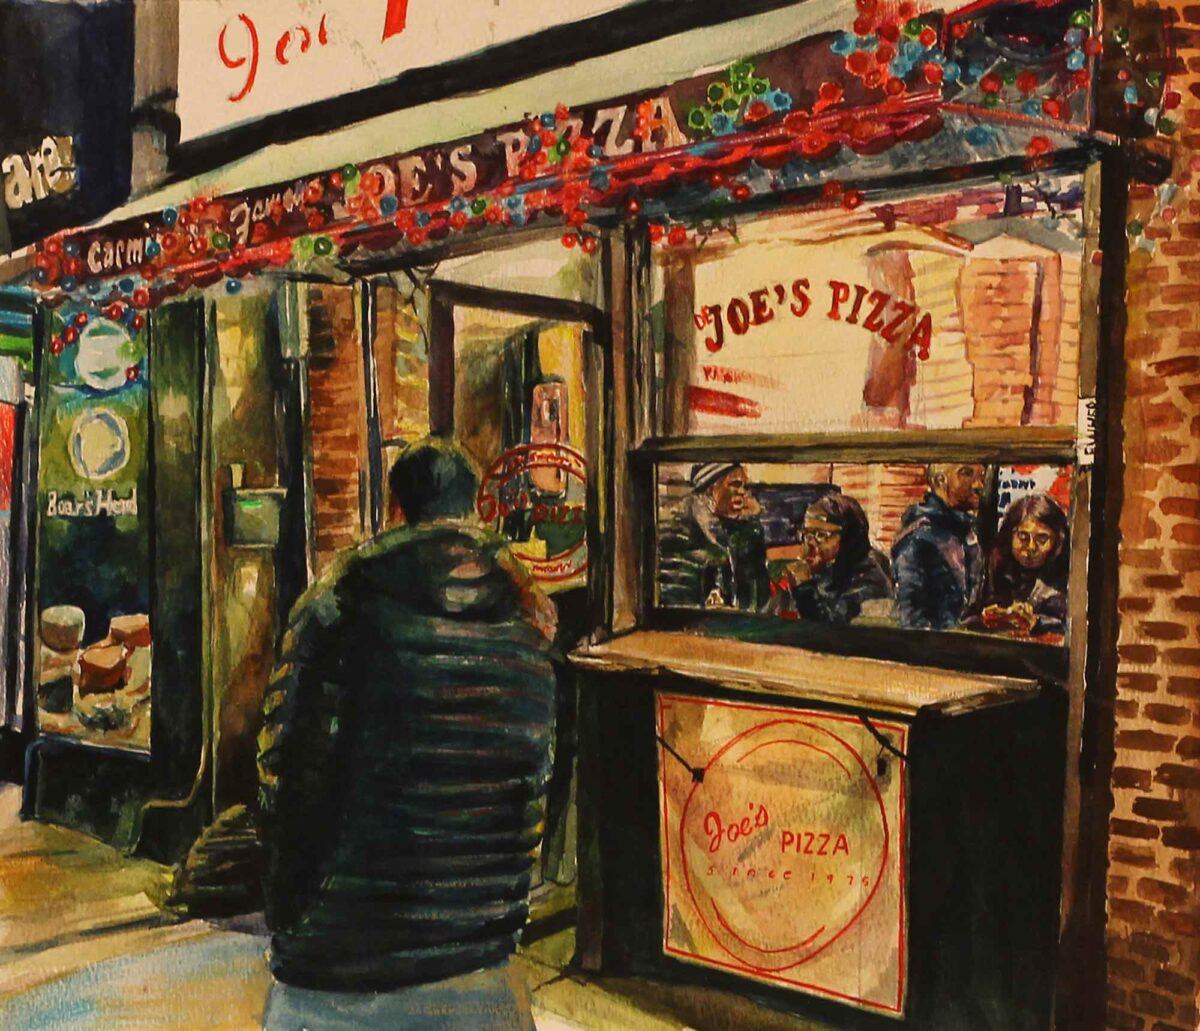 A painting of a man walking past a restaurant named "Joe's Pizza"